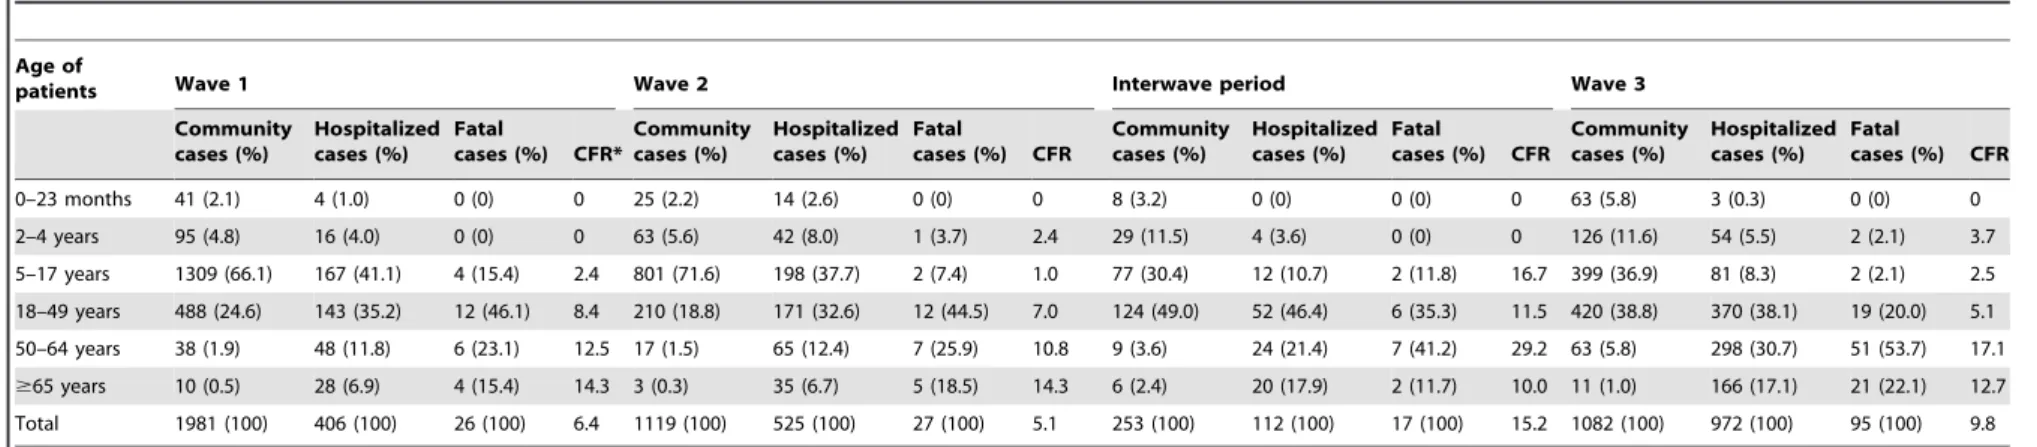 Table 2. Cases infected by influenza A (H3N2) and influenza B viruses in Taiwan from May 2009 to April 2011.